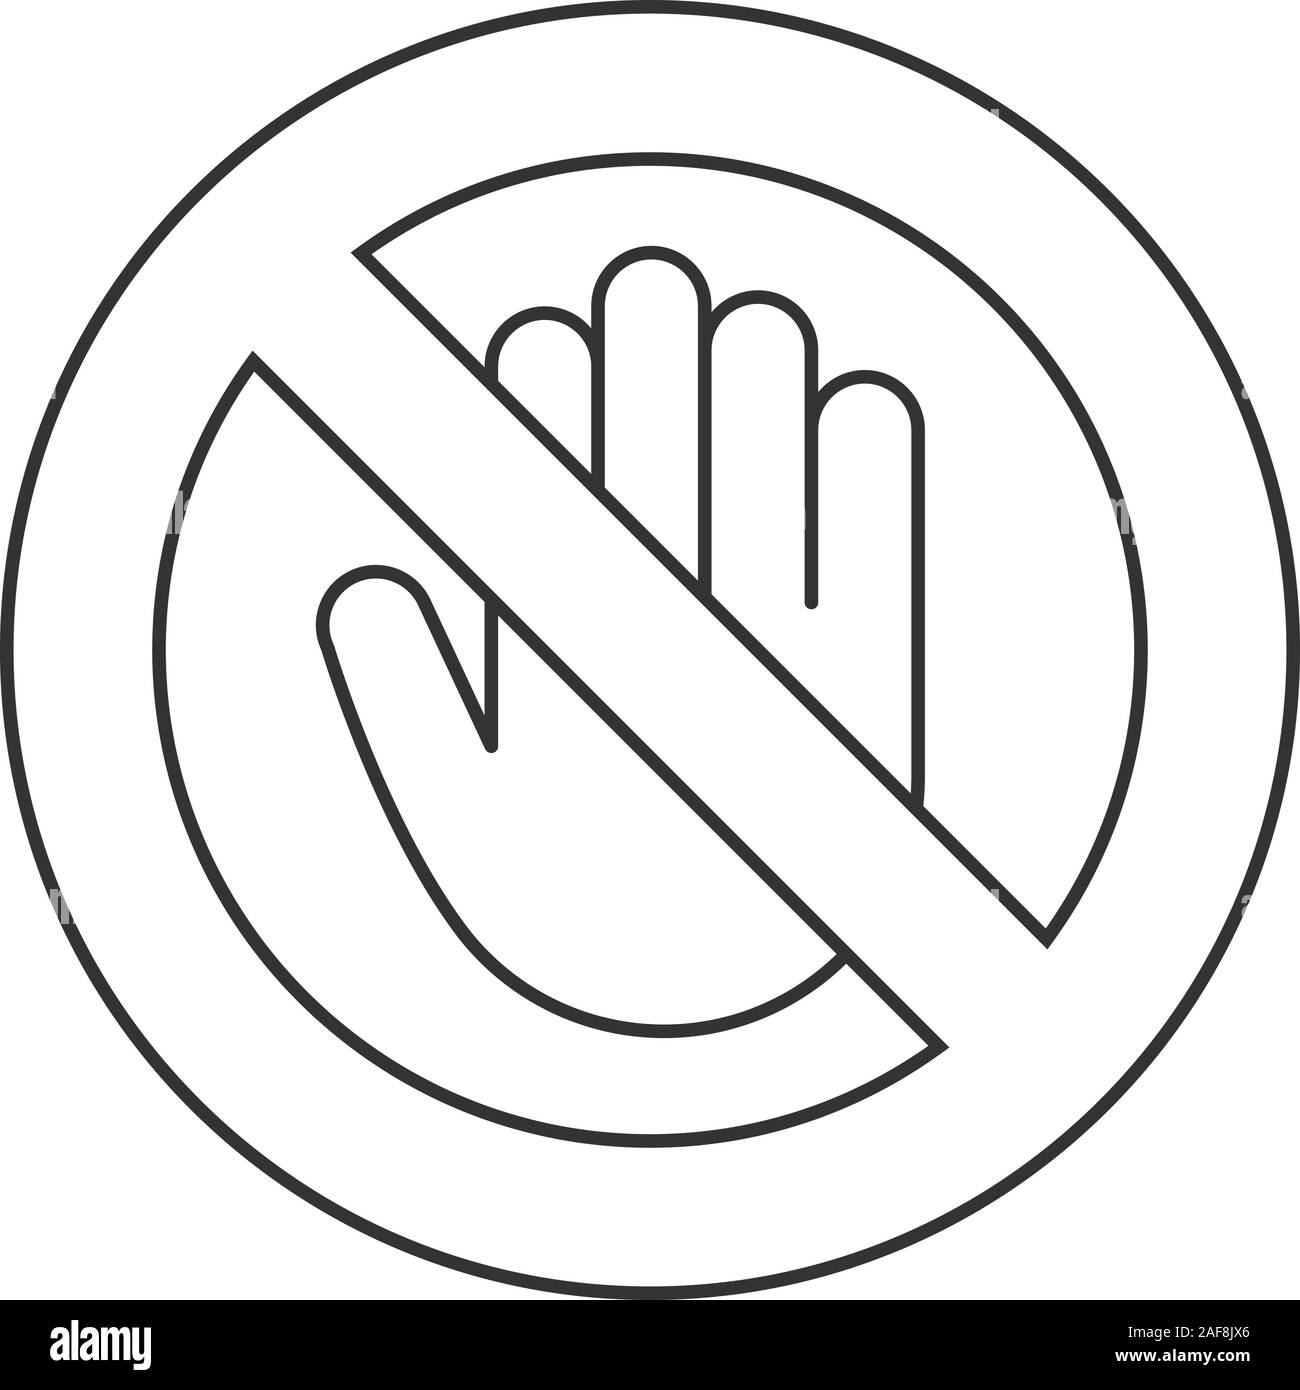 Forbidden sign with stop hand linear icon. No entry prohibition. Do not